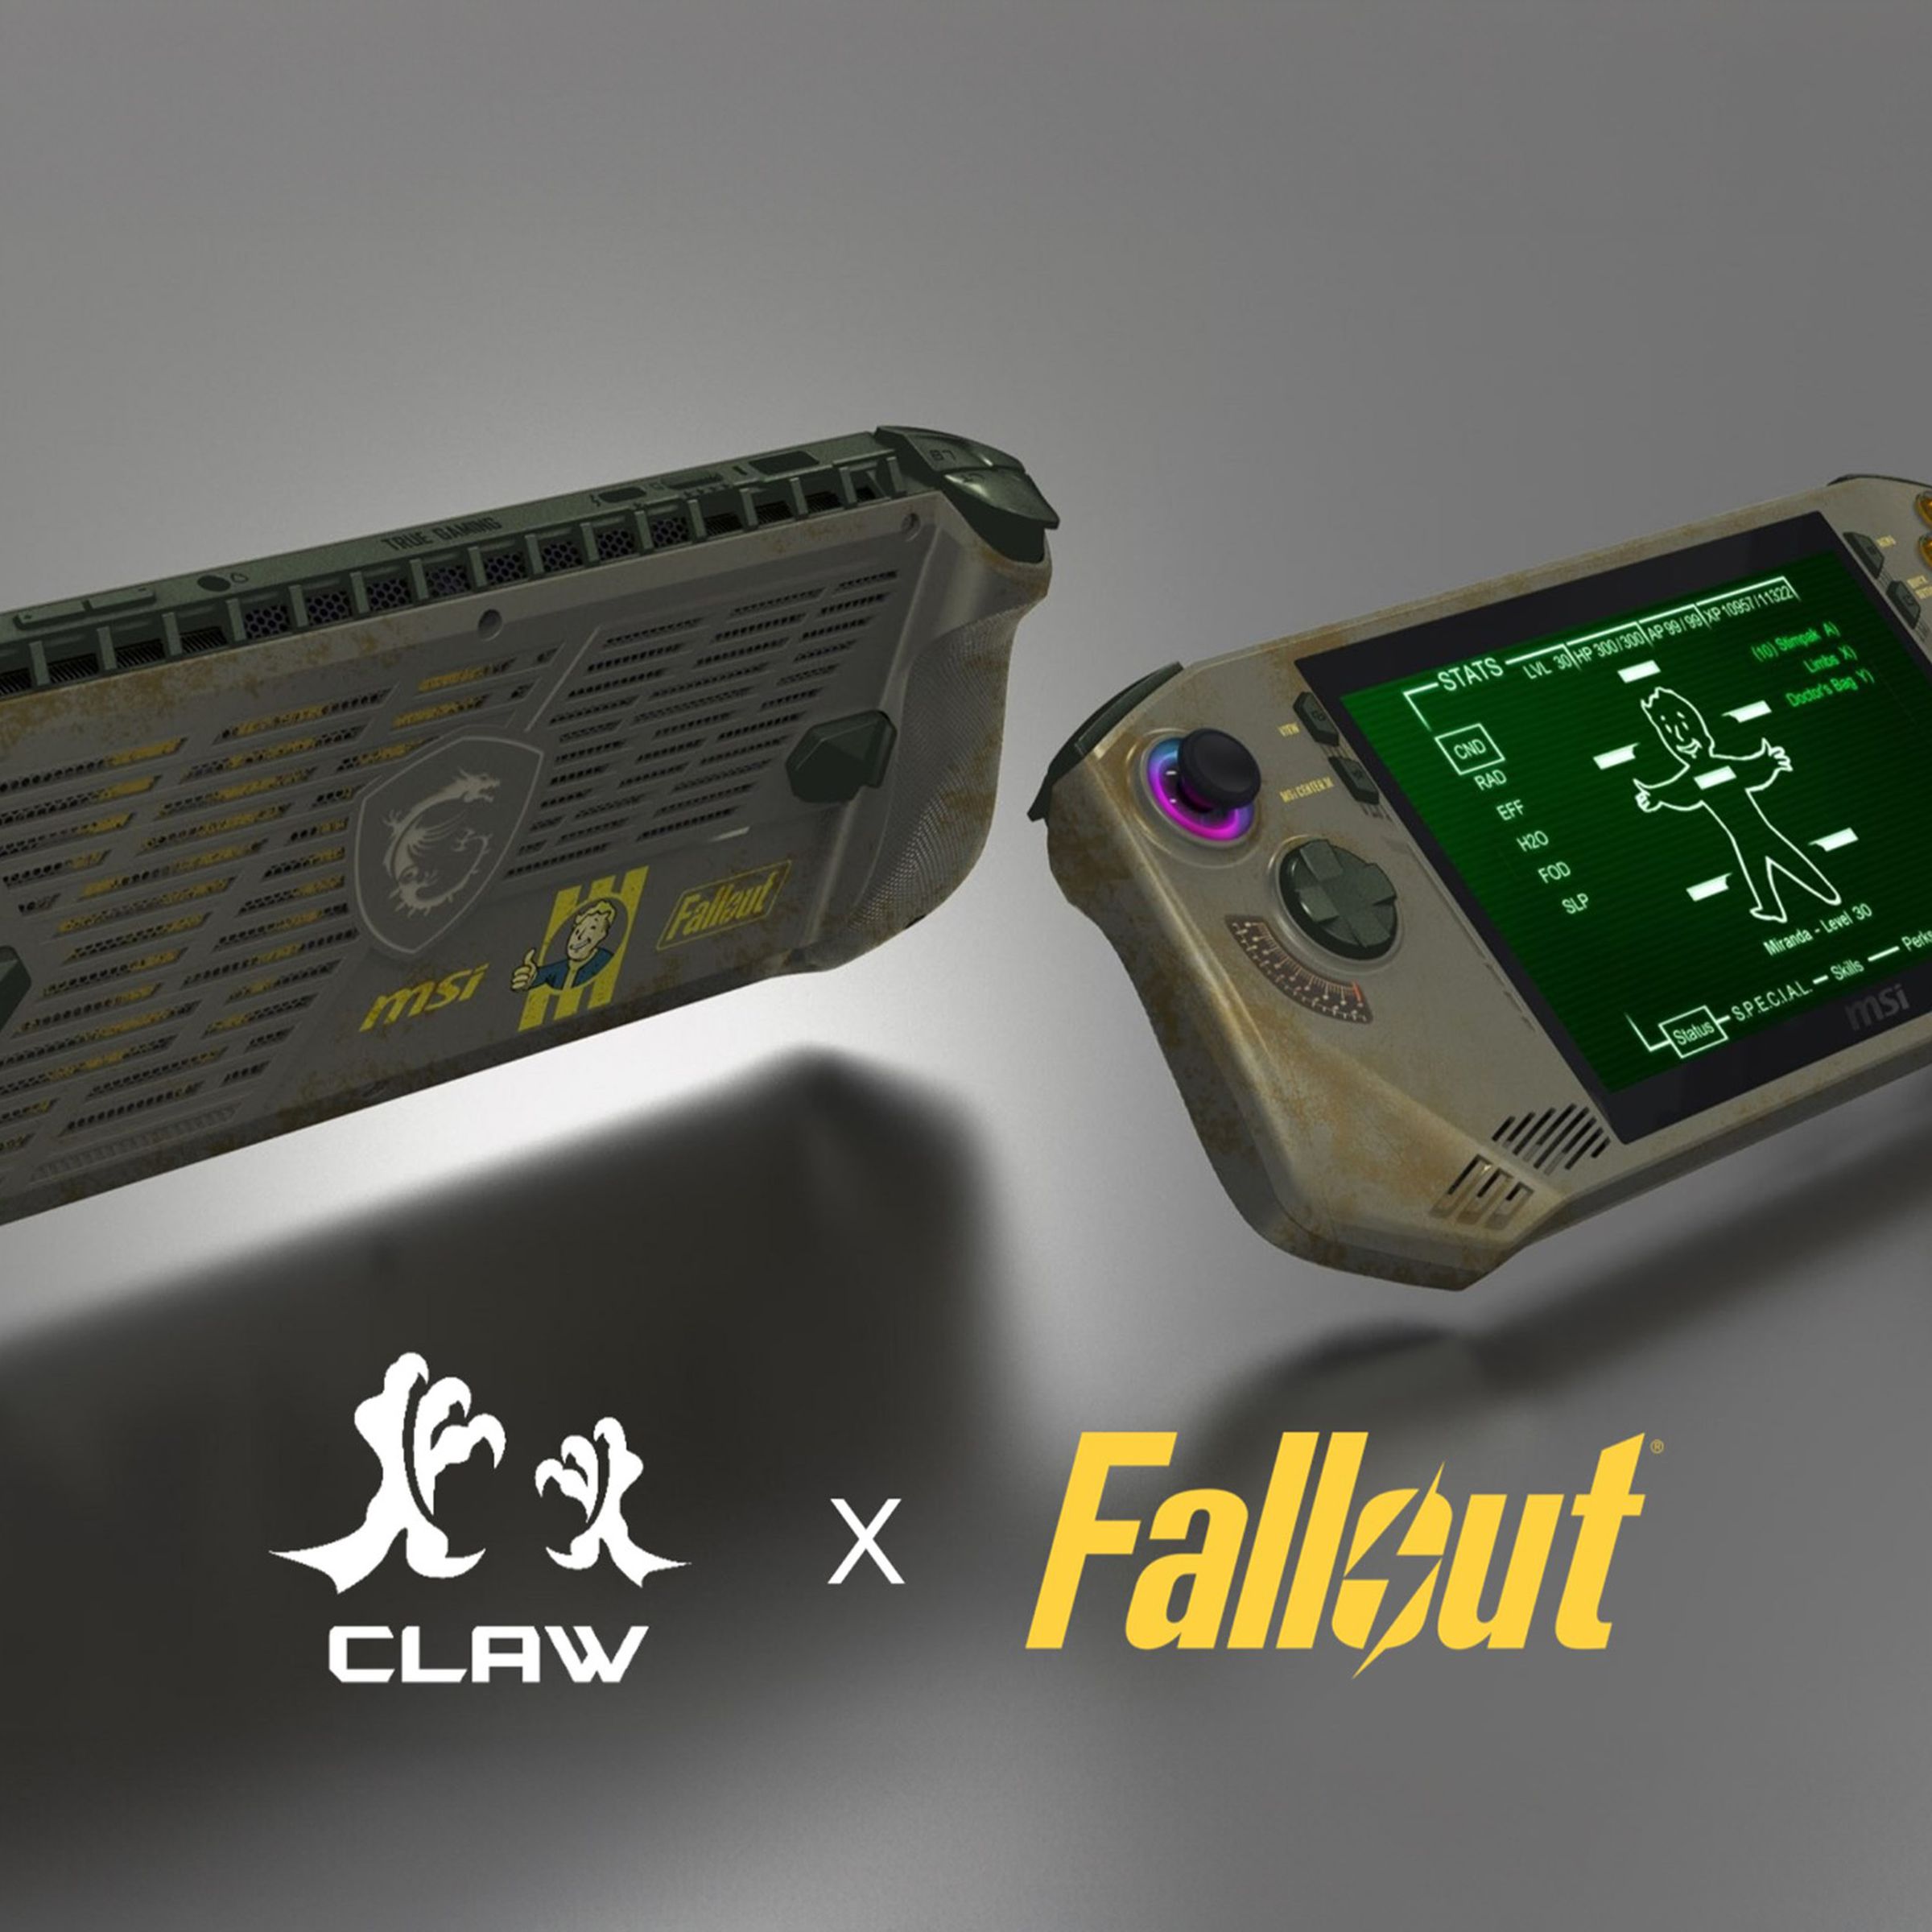 This is not the MSI Claw 8 AI Plus but, rather, a Fallout edition of the original. (I used generative expand around the edge because the image was cropping poorly.)